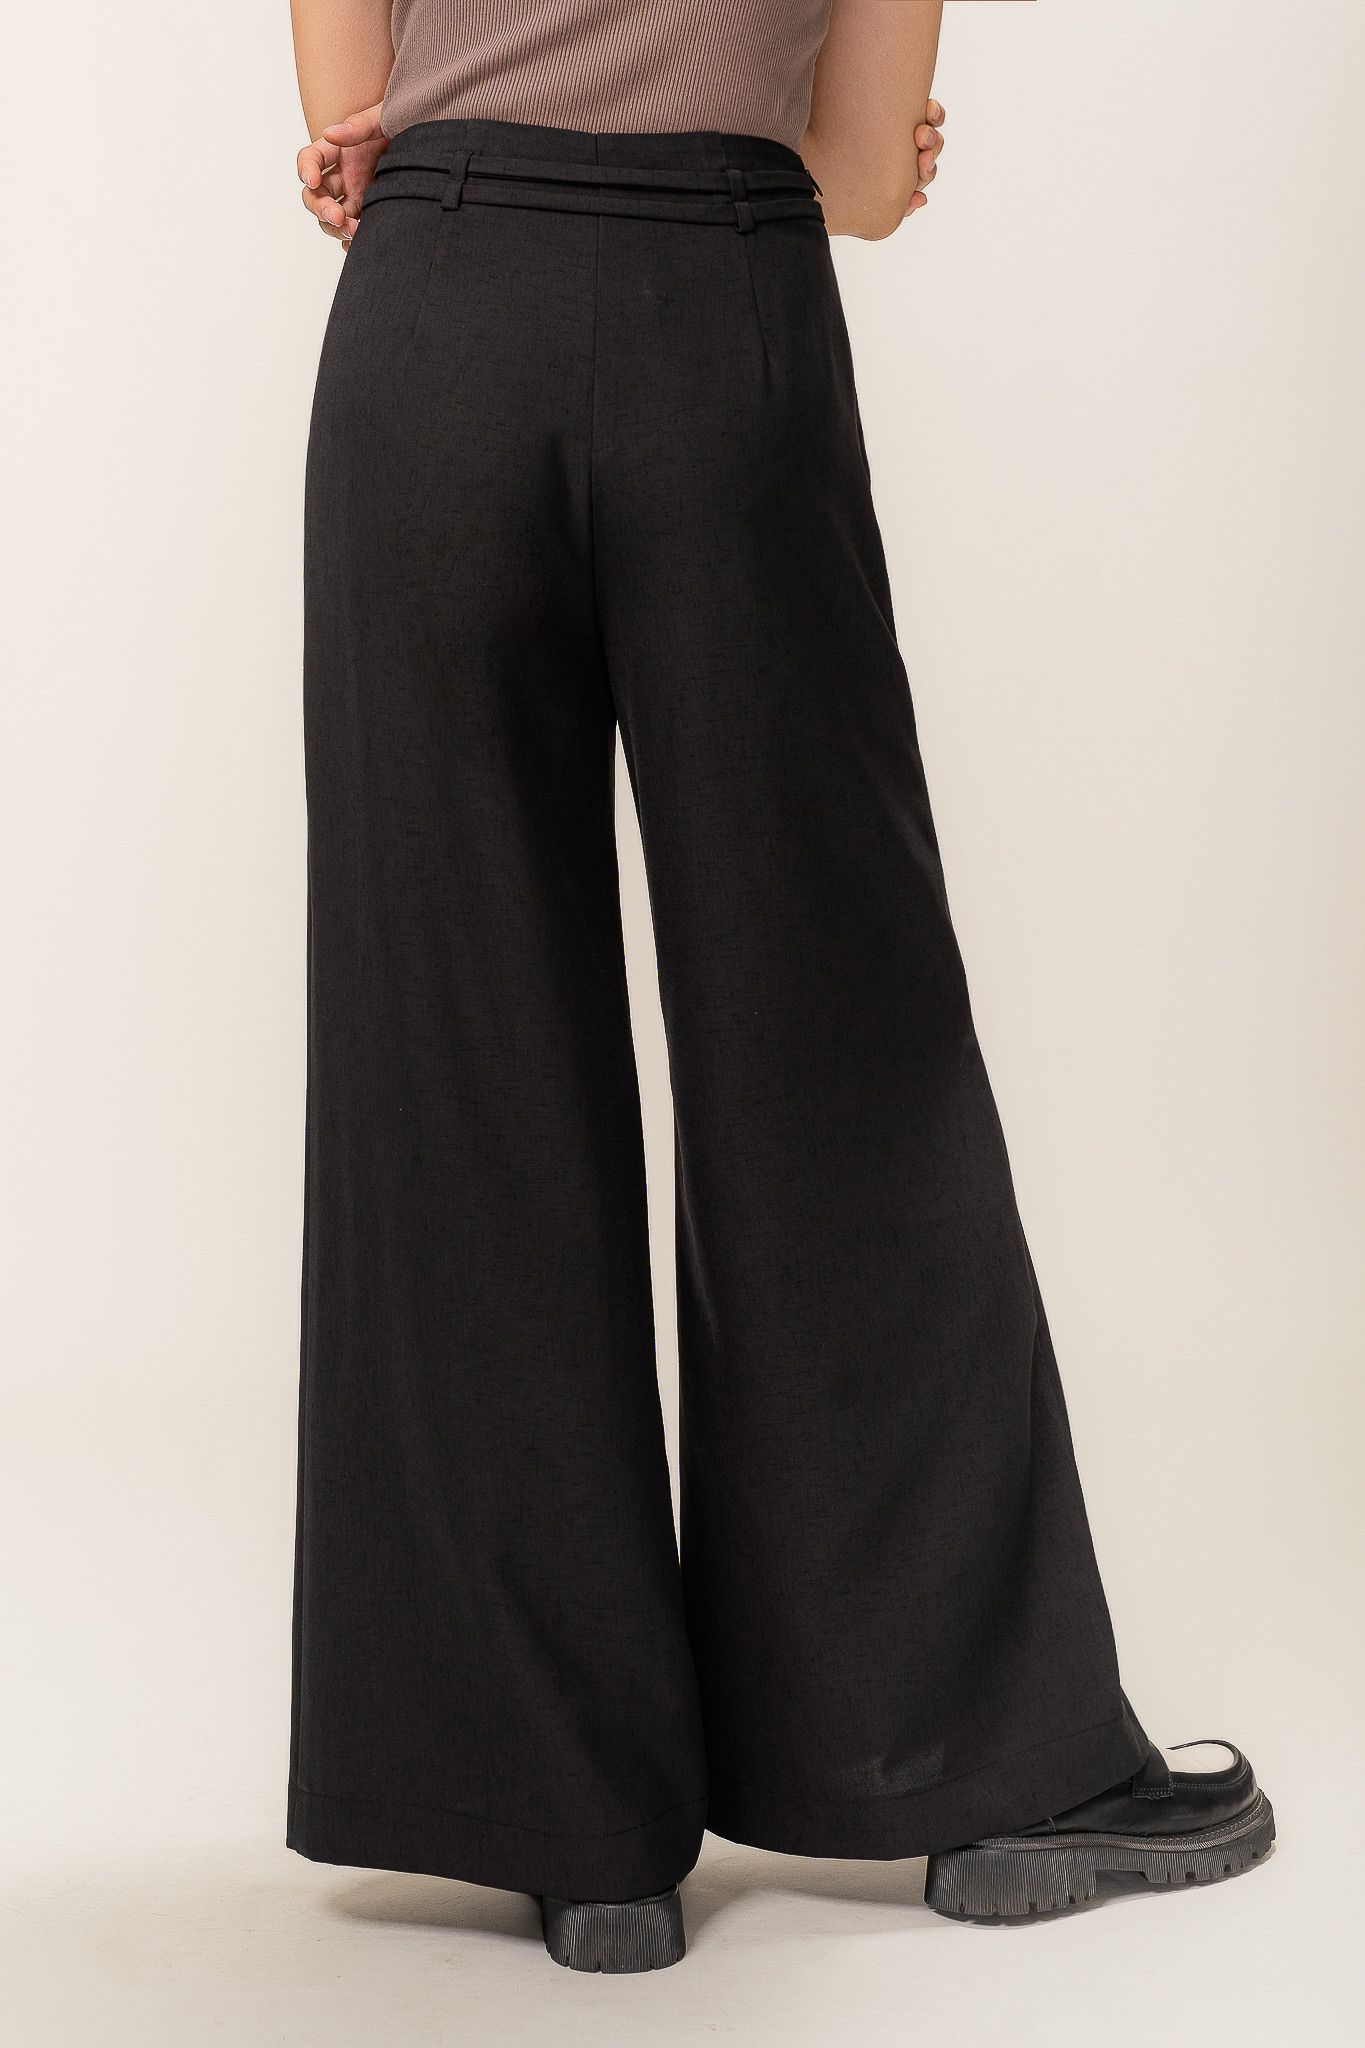  Black Wide Leg Trousers With Belt 